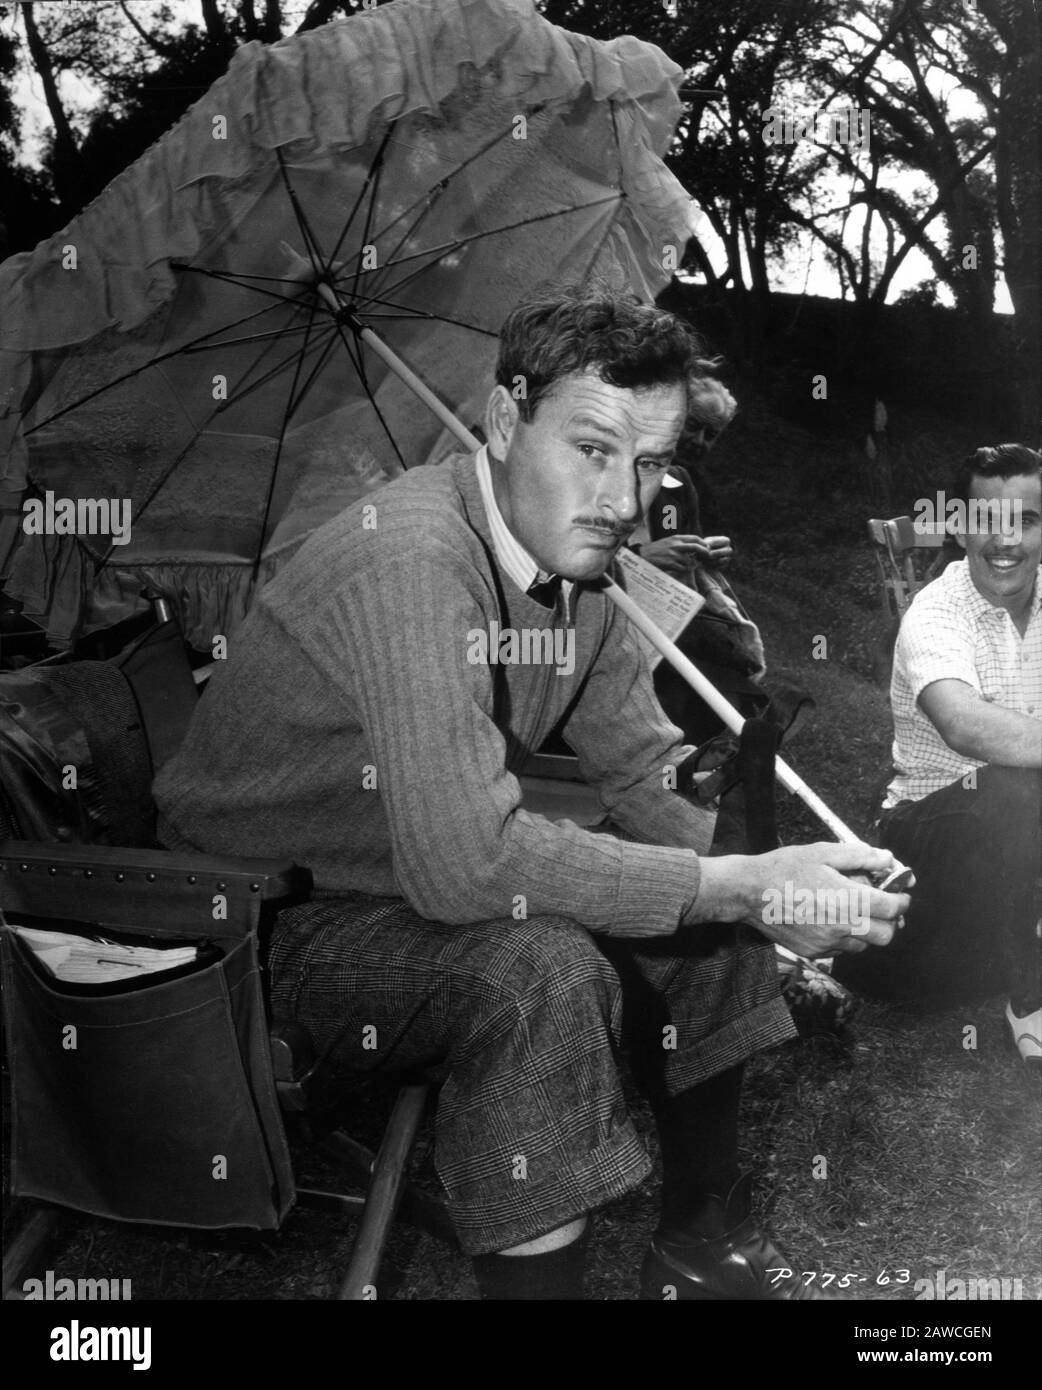 Director WILLIAM A. WELLMAN on set location candid with parasol during filming of BEAU GESTE 1939 novel P.C. WREN Paramount Pictures Corporation Stock Photo